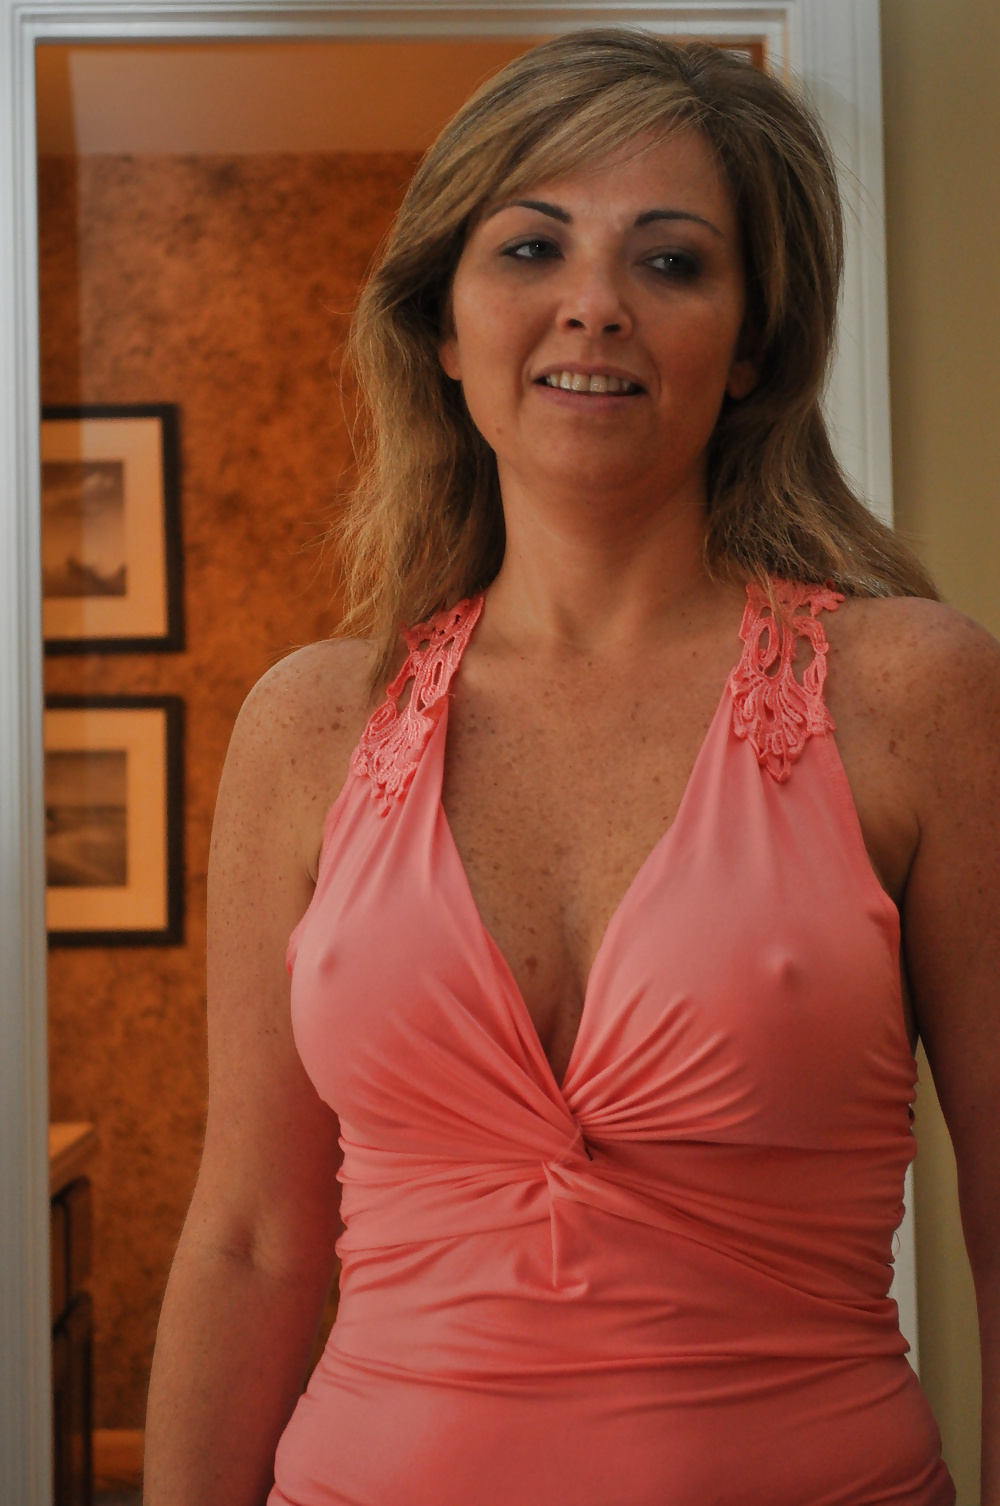 Hot Milf Wife New Orleans Vacation #32108236